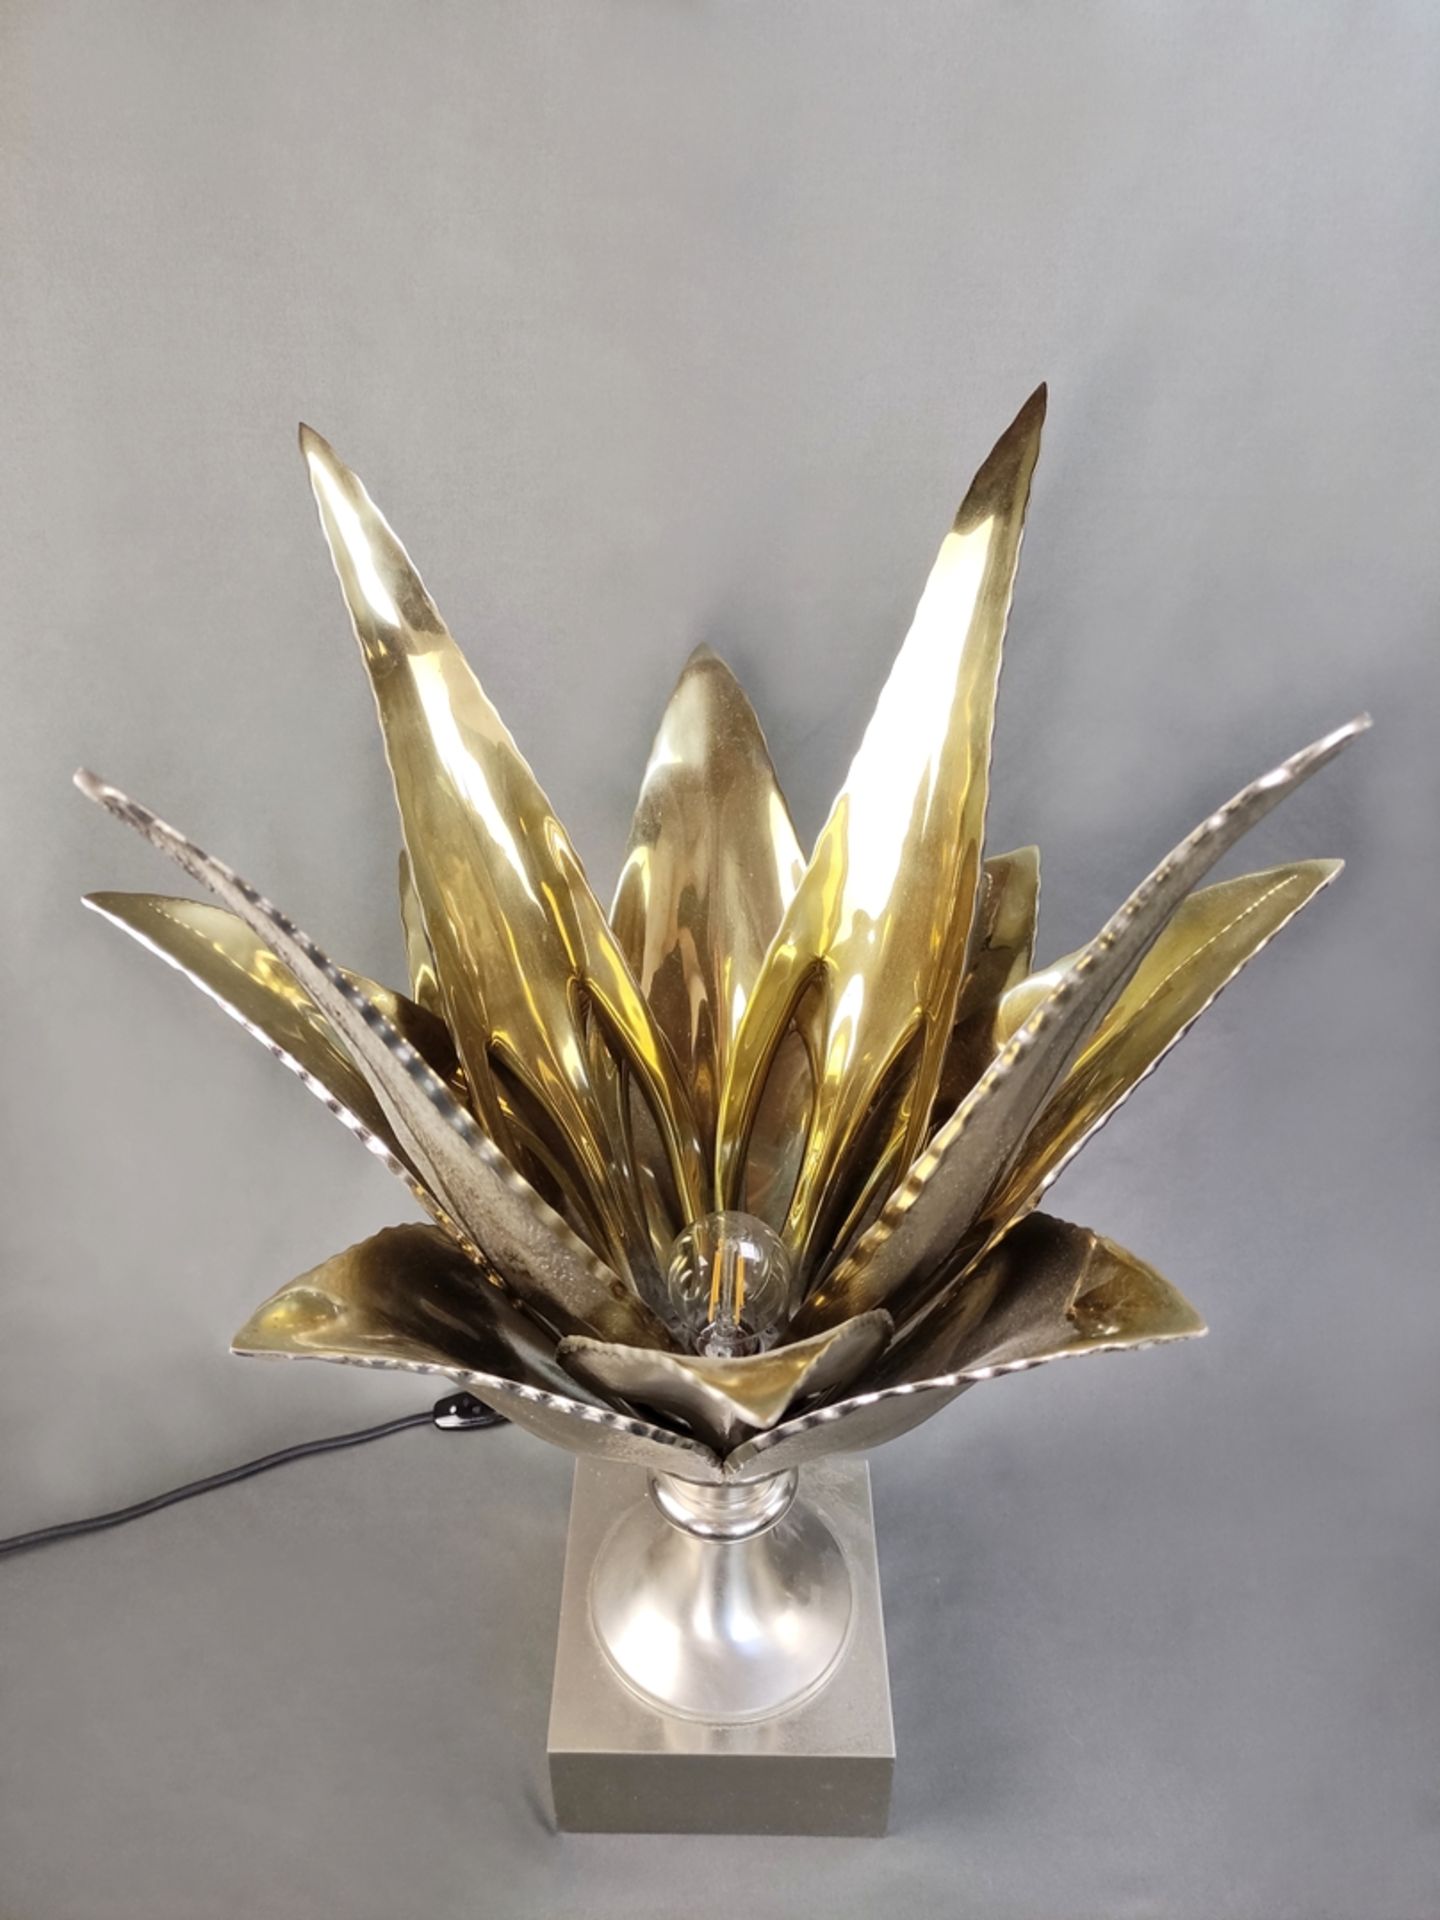 Pair of table lamps, Maison Charles, France, c. 1970, "Aloes", in the shape of aloe vera plants, si - Image 2 of 2